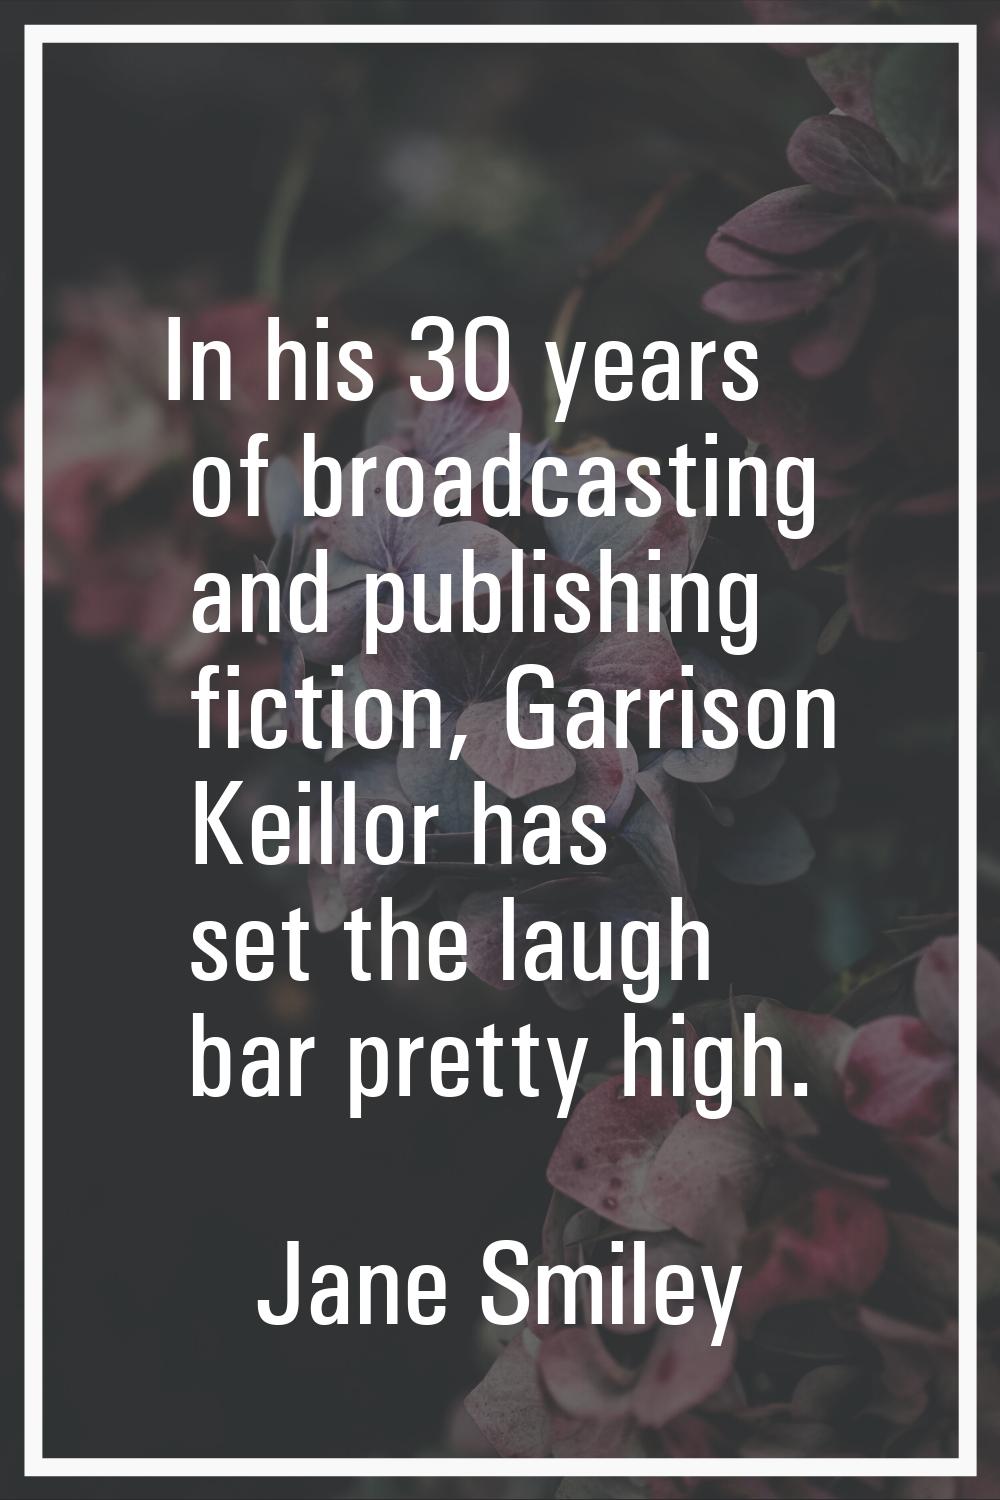 In his 30 years of broadcasting and publishing fiction, Garrison Keillor has set the laugh bar pret